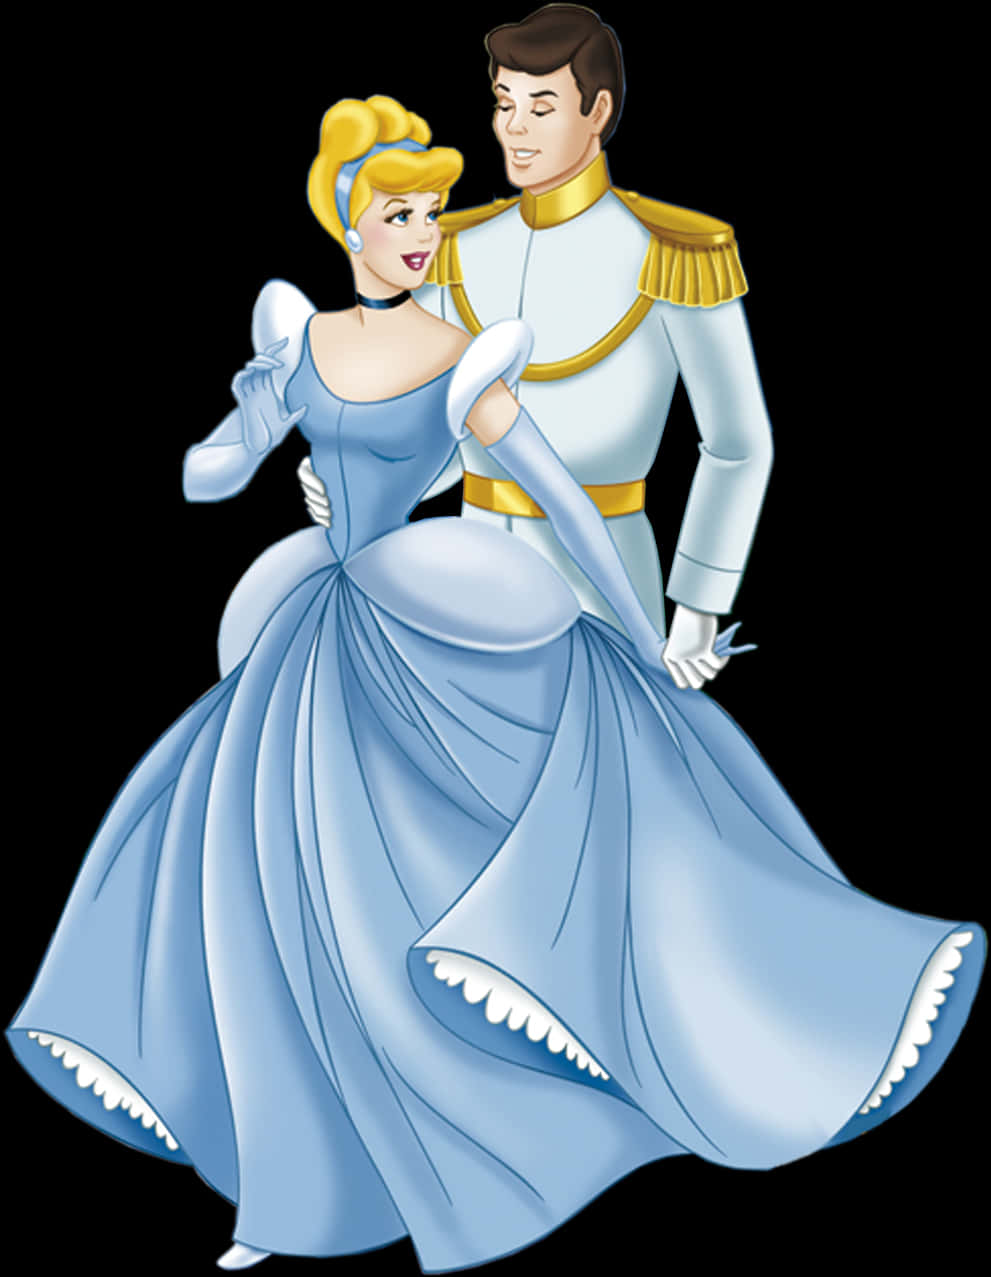 A Cartoon Of A Man And Woman Dancing